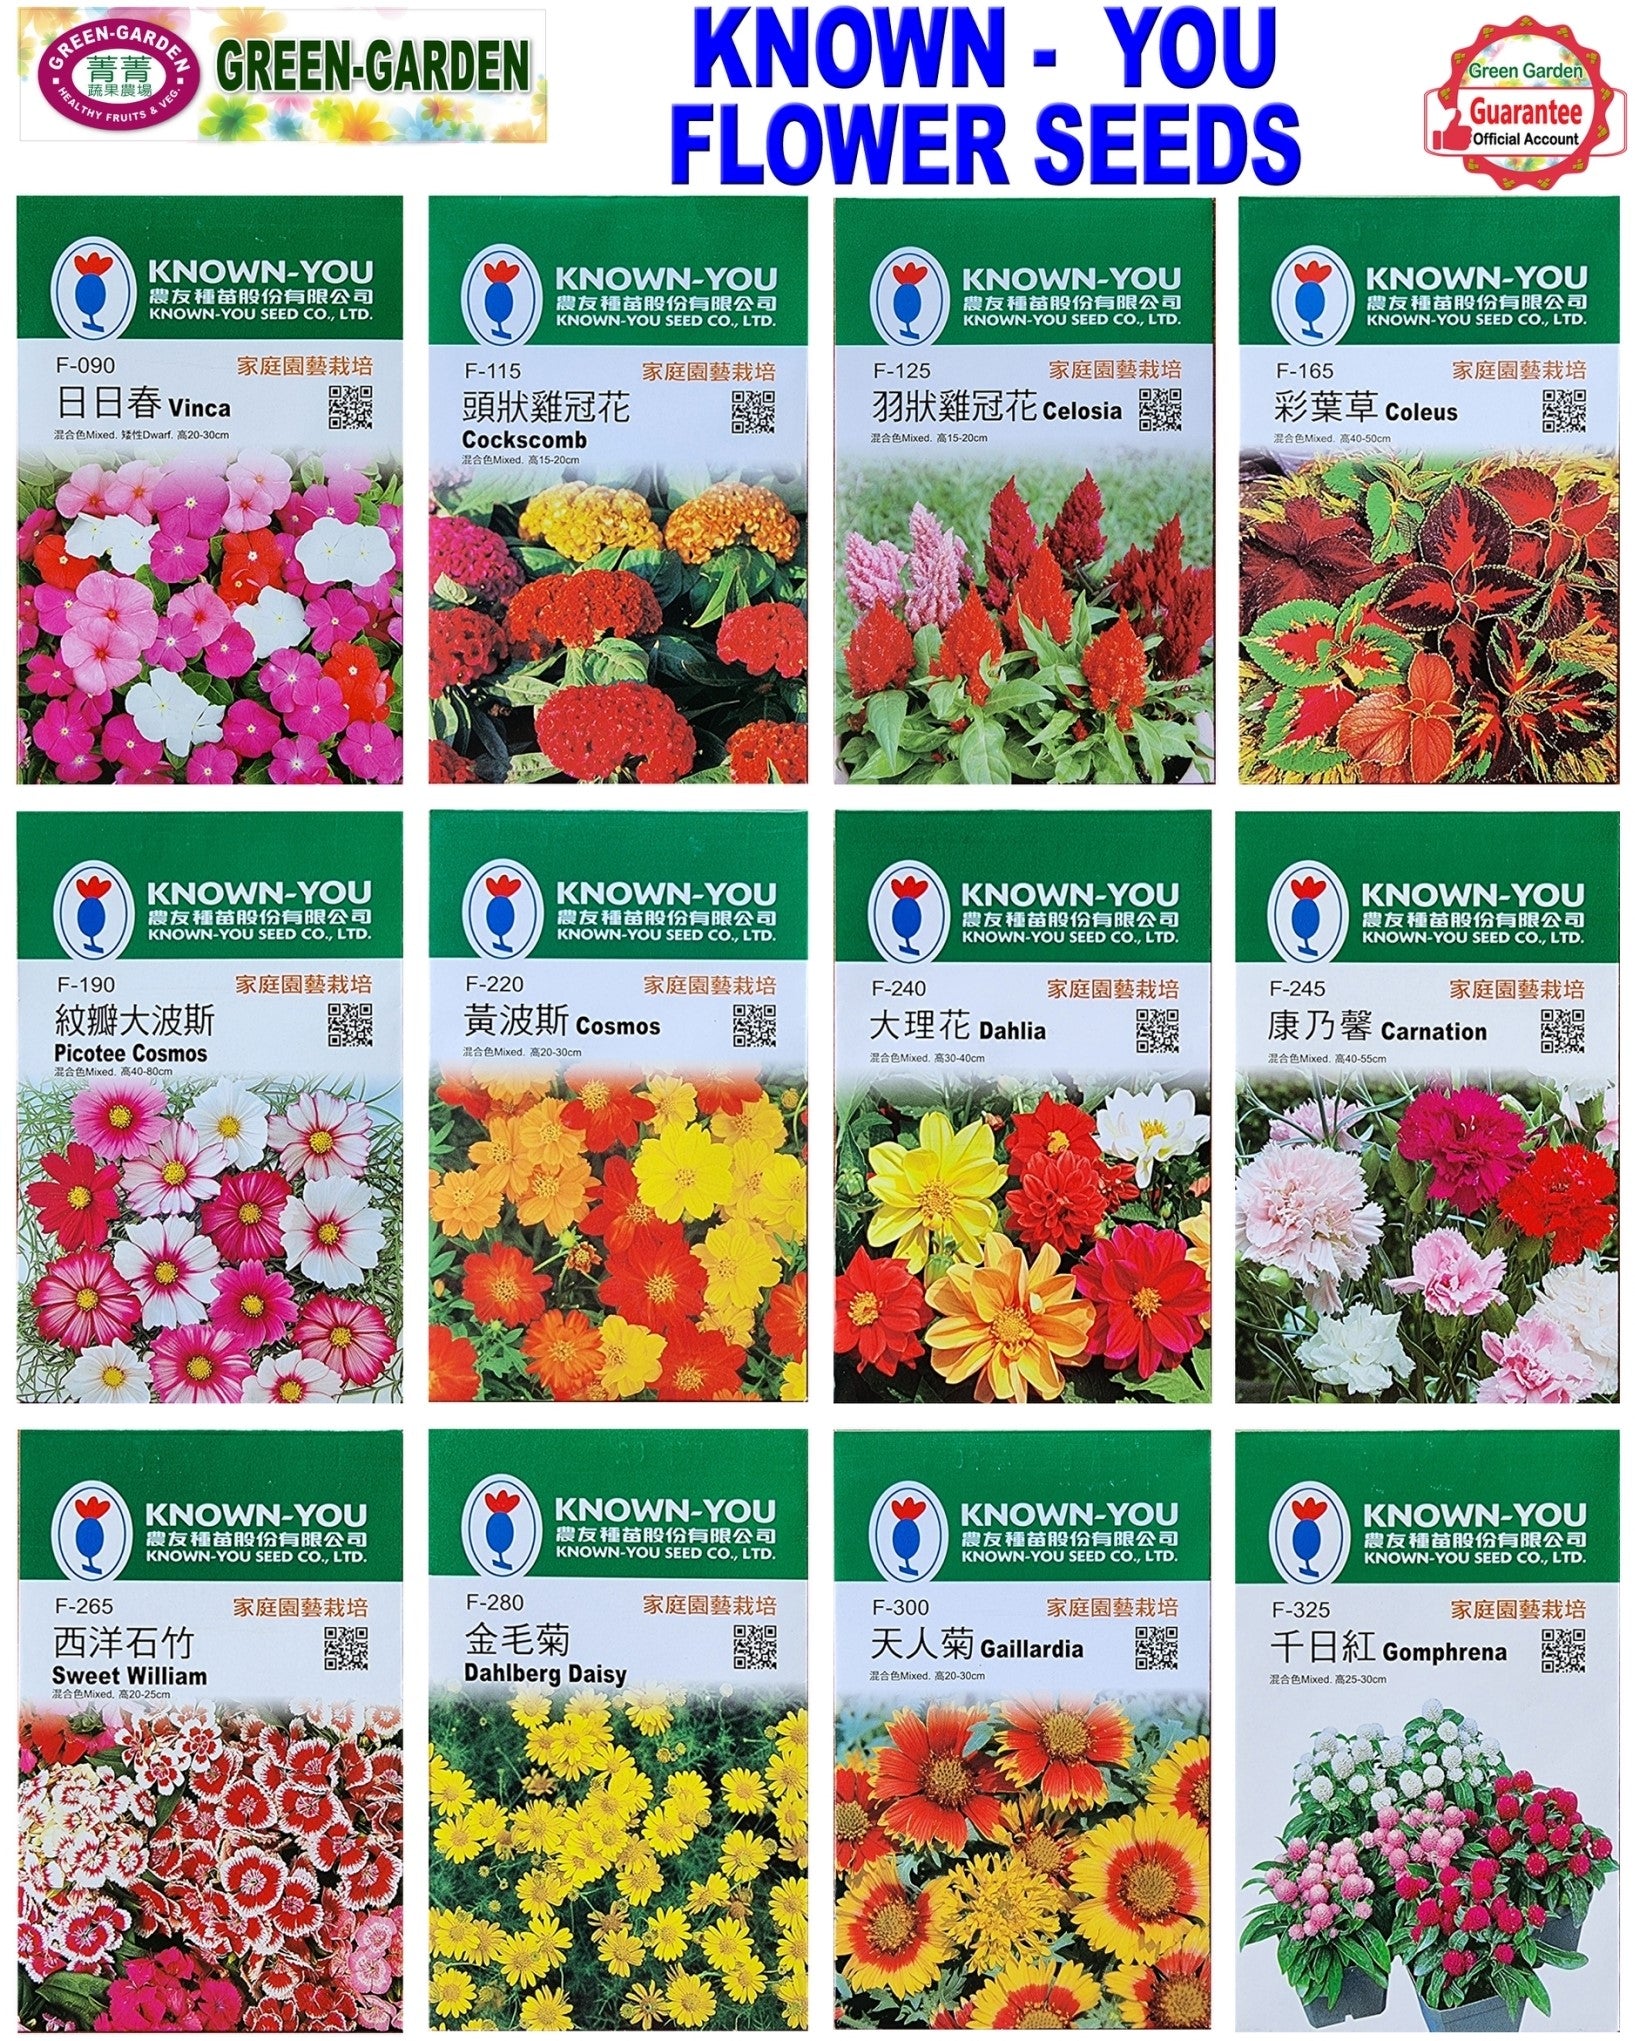 Known You Flower Seeds (F-385 Impatiens)